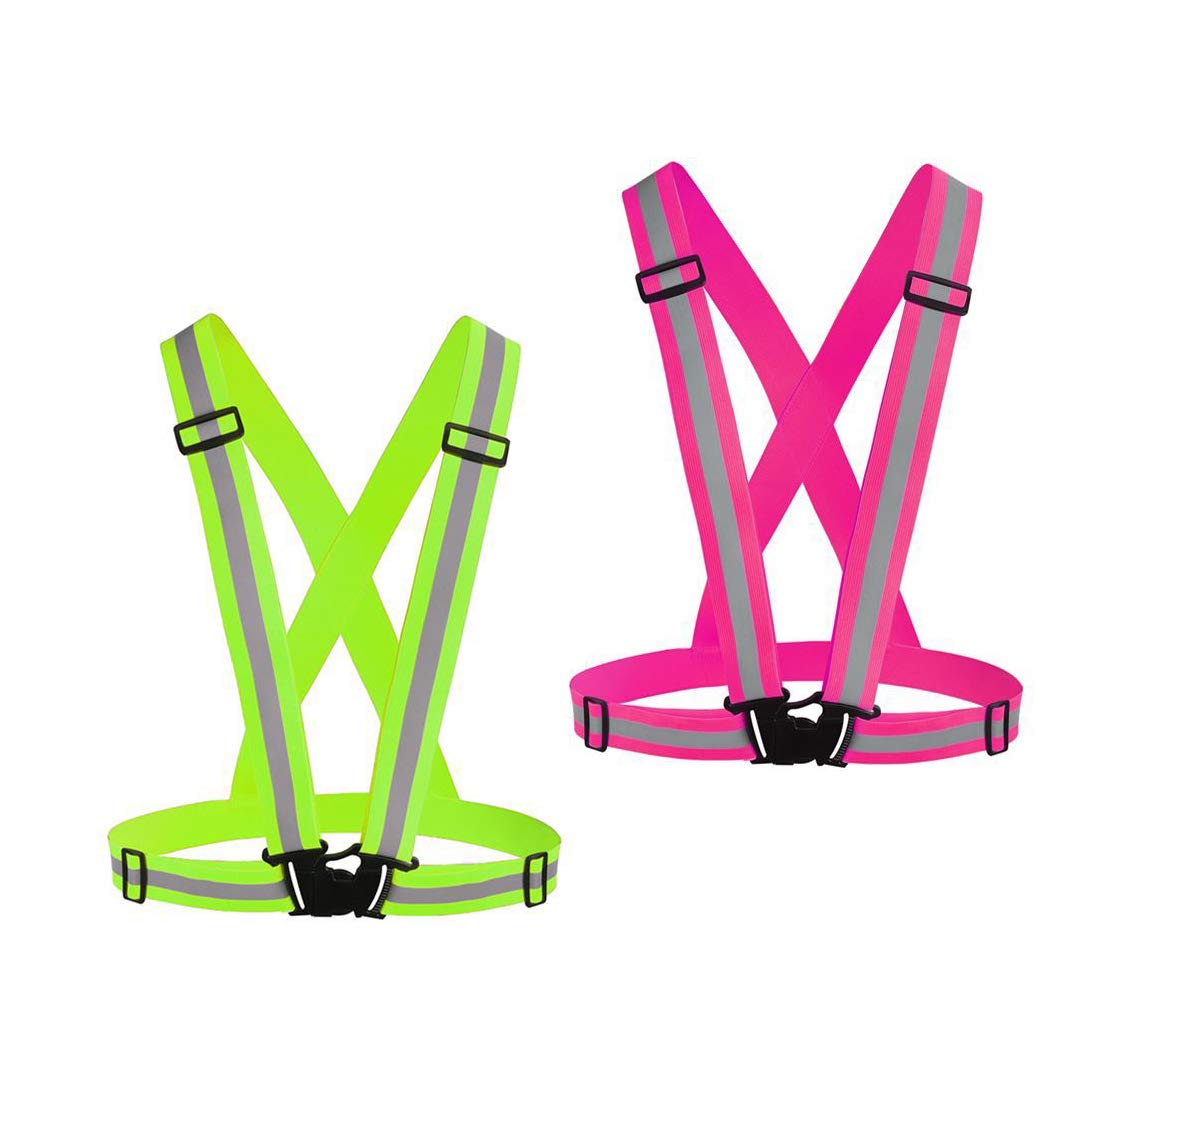 Chiwo Reflective Vest Running Gear 2Pack, High Visibility Adjustable Safety Vest for Night Cycling,Hiking, Jogging,Dog Walking, Construction safe (Green Pink)